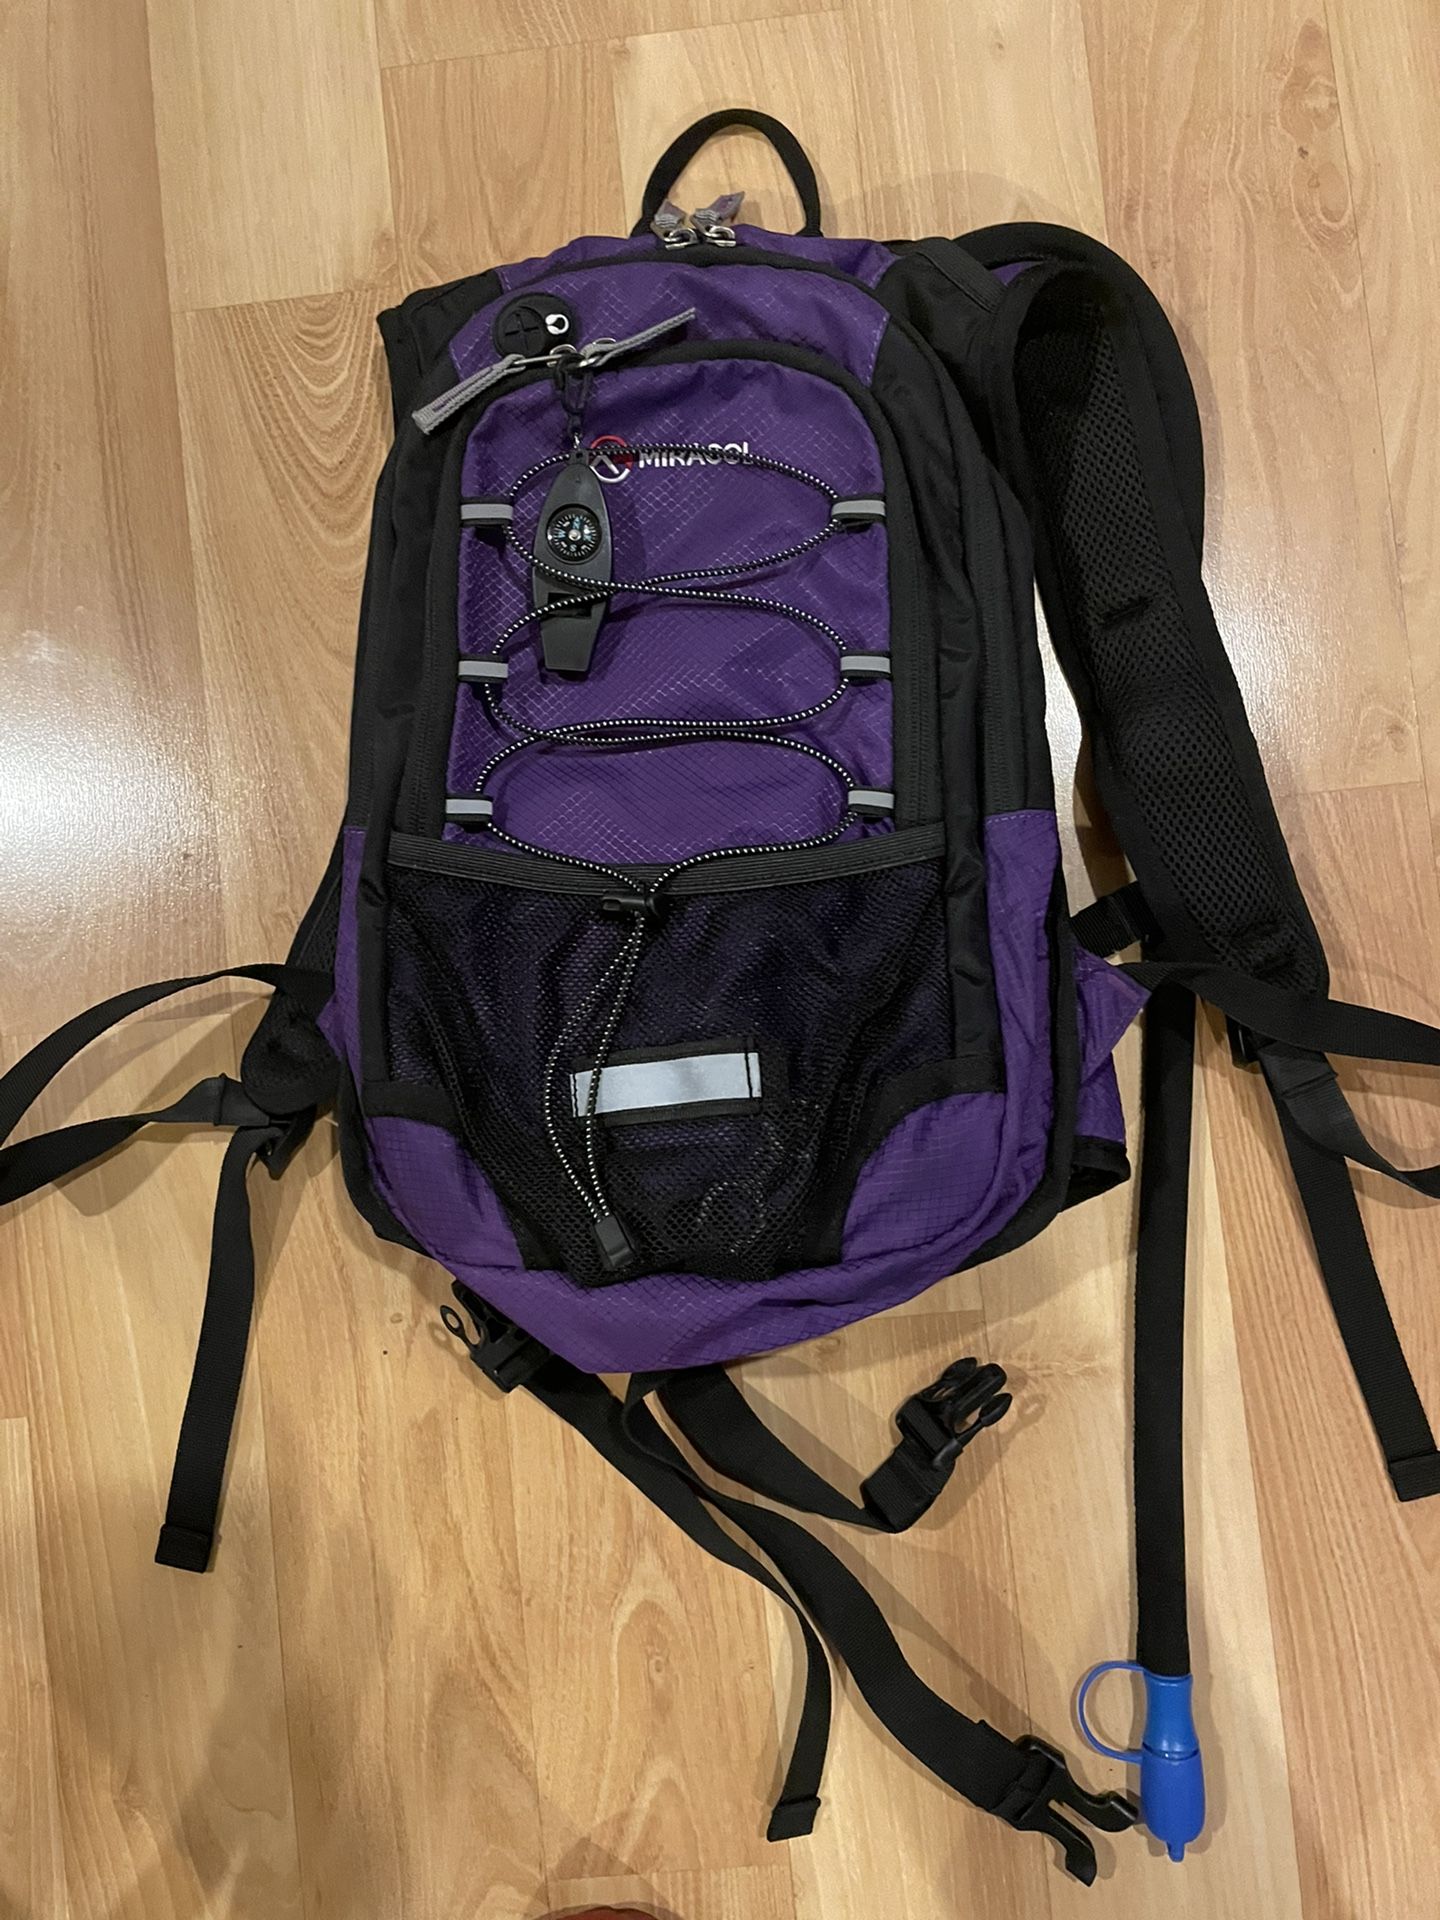 Magicol Hydrating Backpack $25